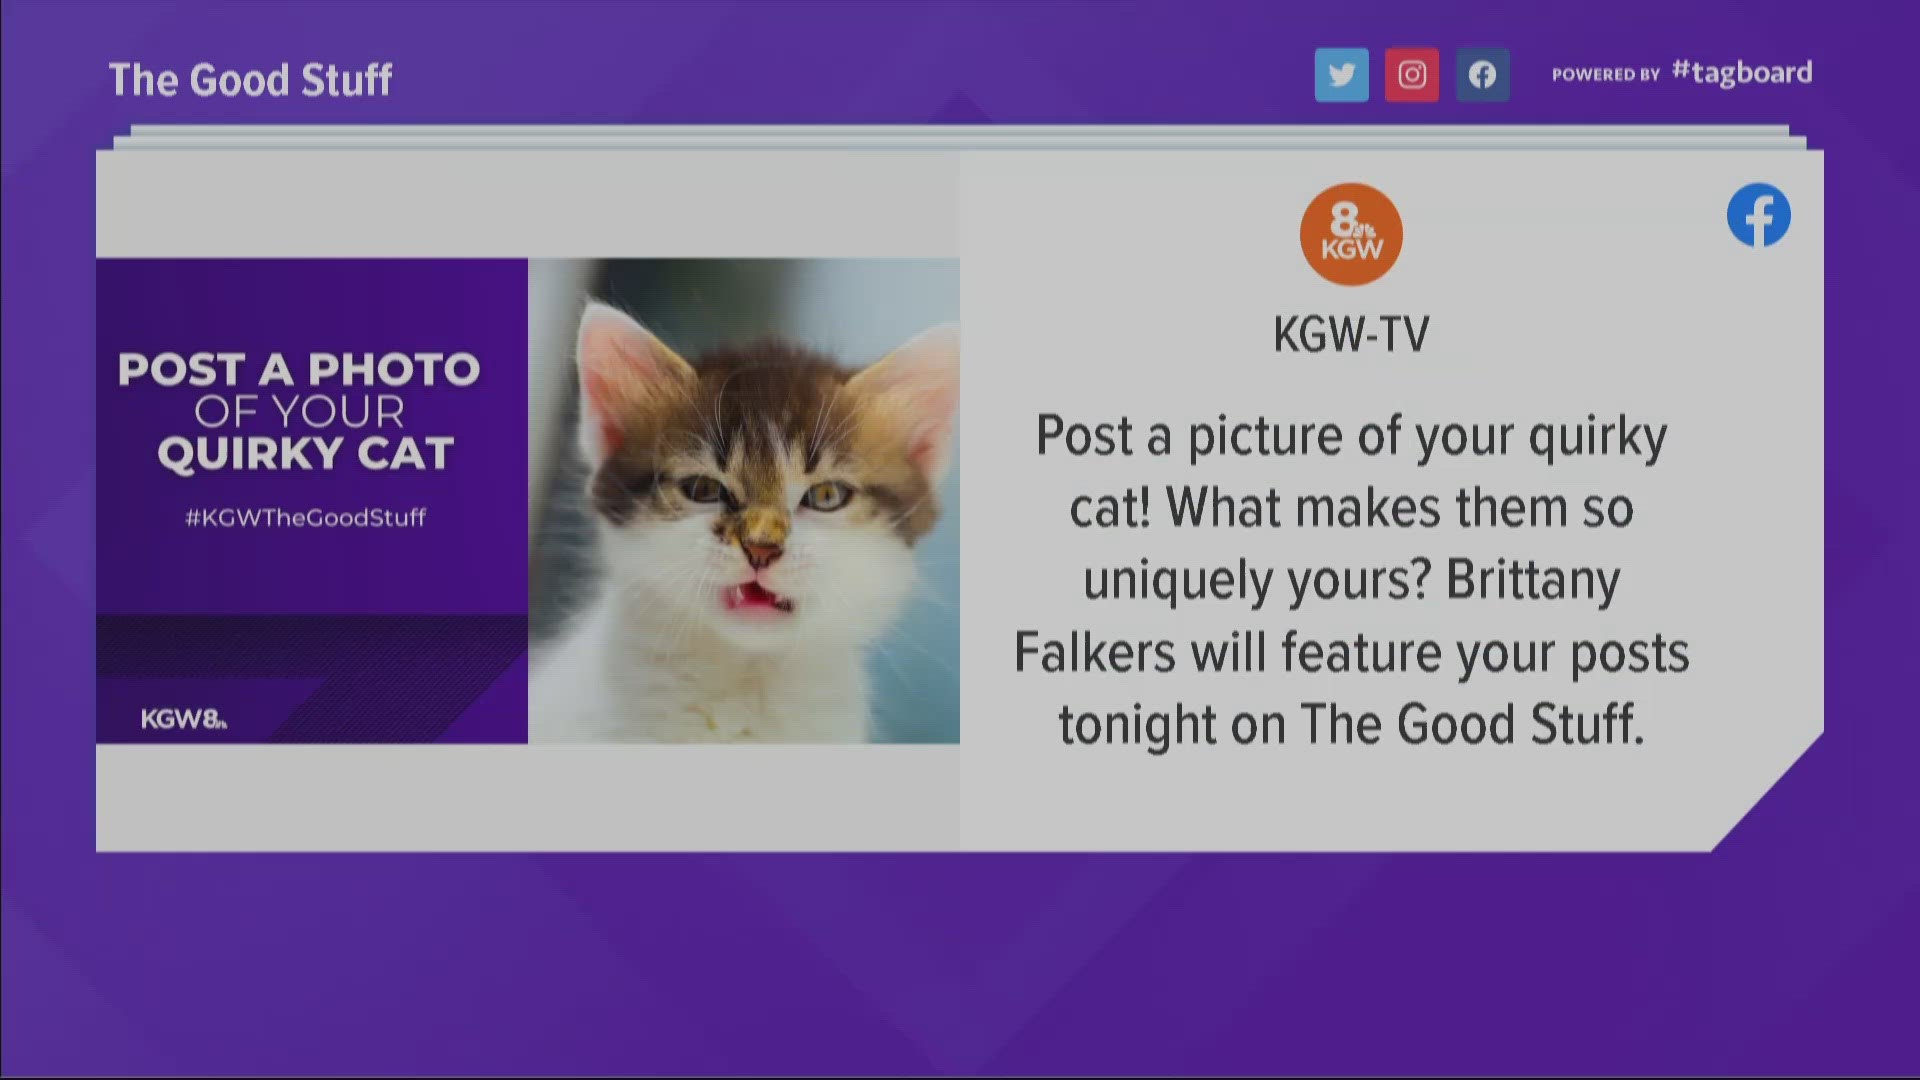 KGW viewers submitted quirky pictures of their cats while describing what makes their cats so unique on the good stuff.